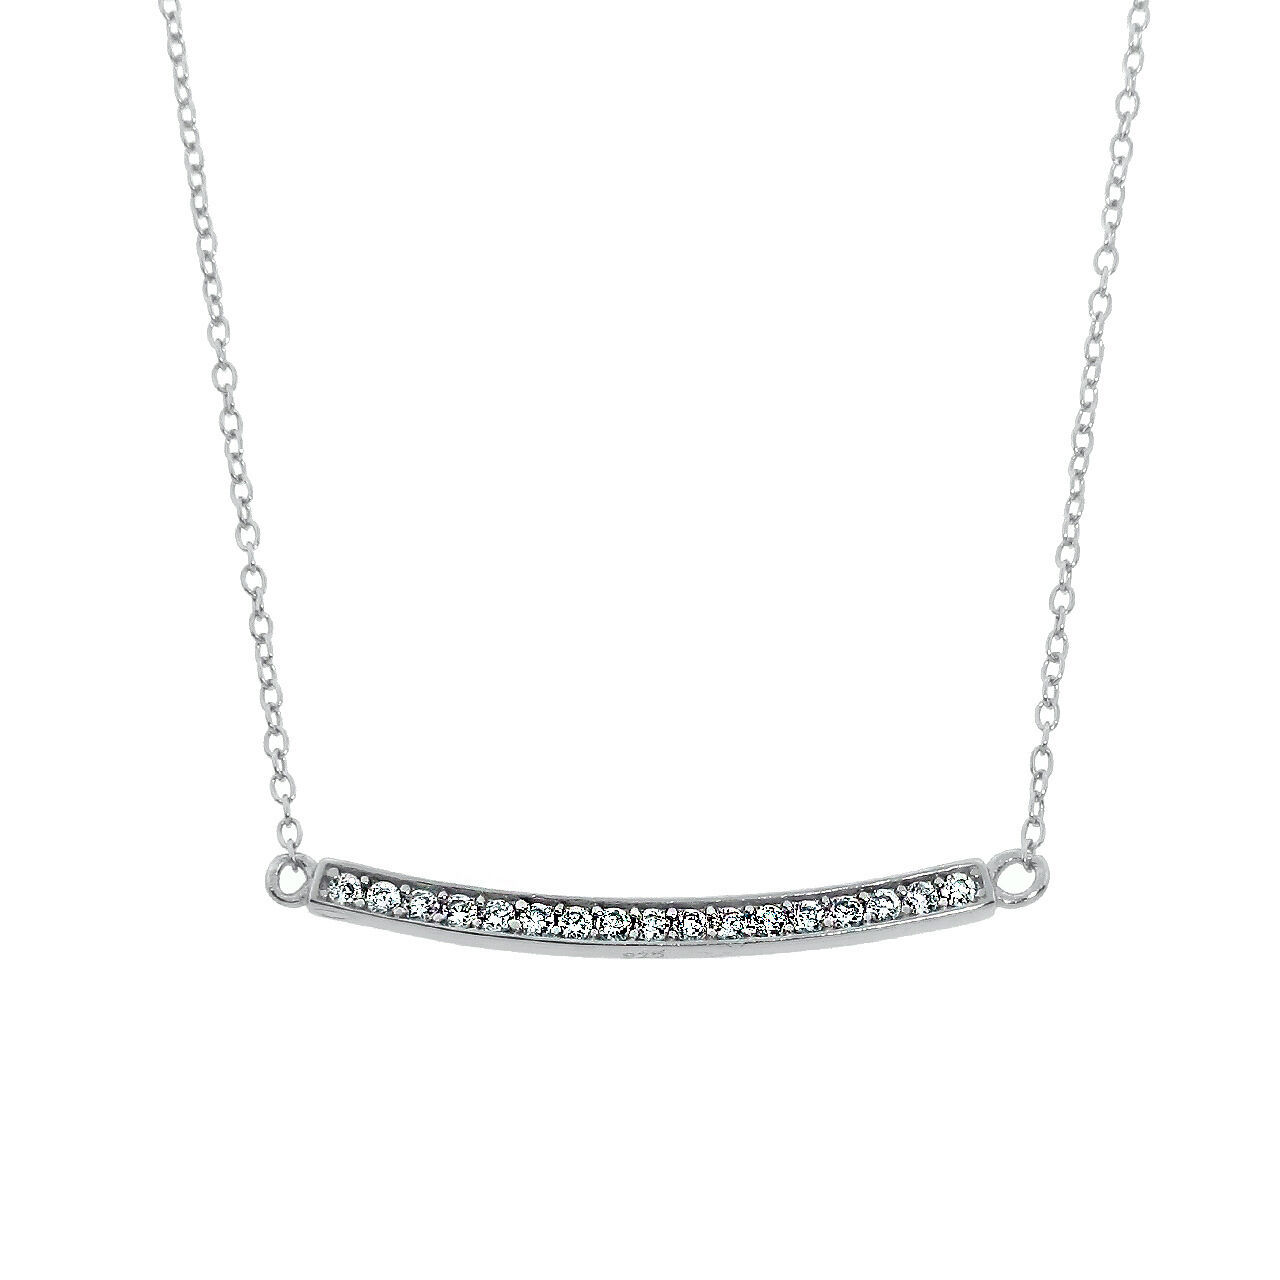 Primary image for Sterling Silver CZ Bar Necklace Chain Cubic Zirconia w/ 16 - 18 Chain Extantion